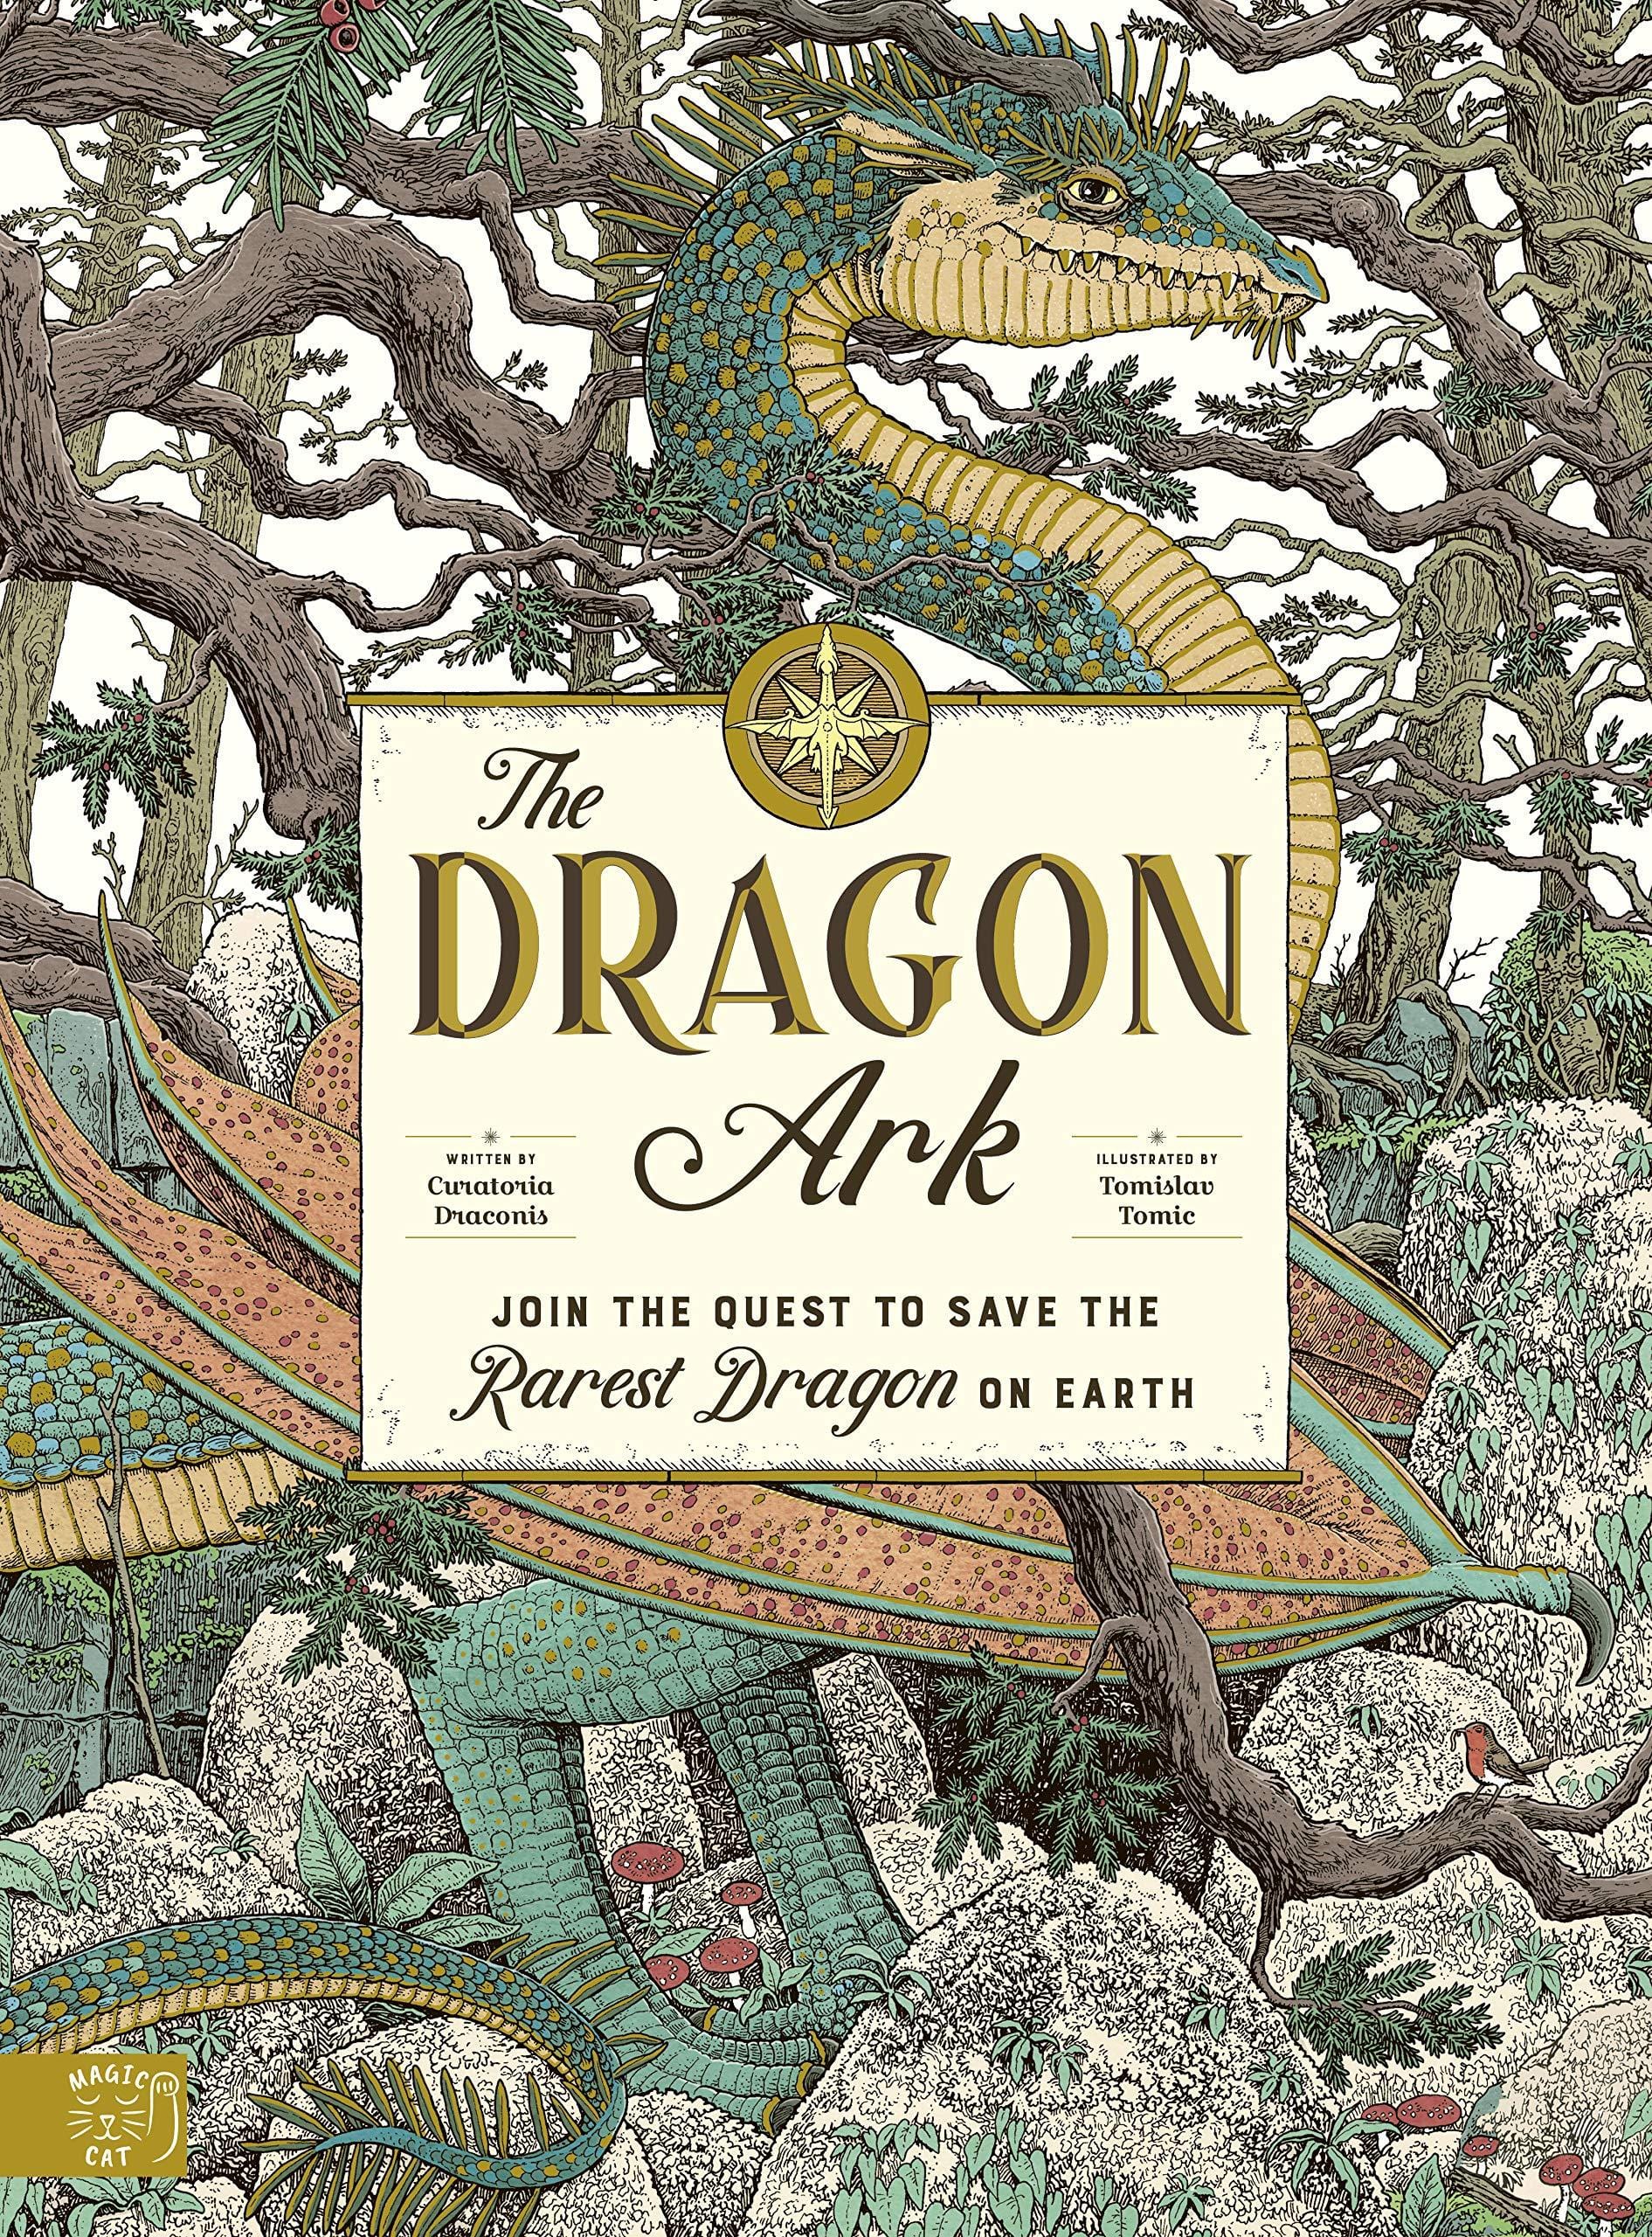 The Dragon Ark by Curatoria Draconis & Tomislav Tomic - Wigwam Toys Brighton (5844652458144)